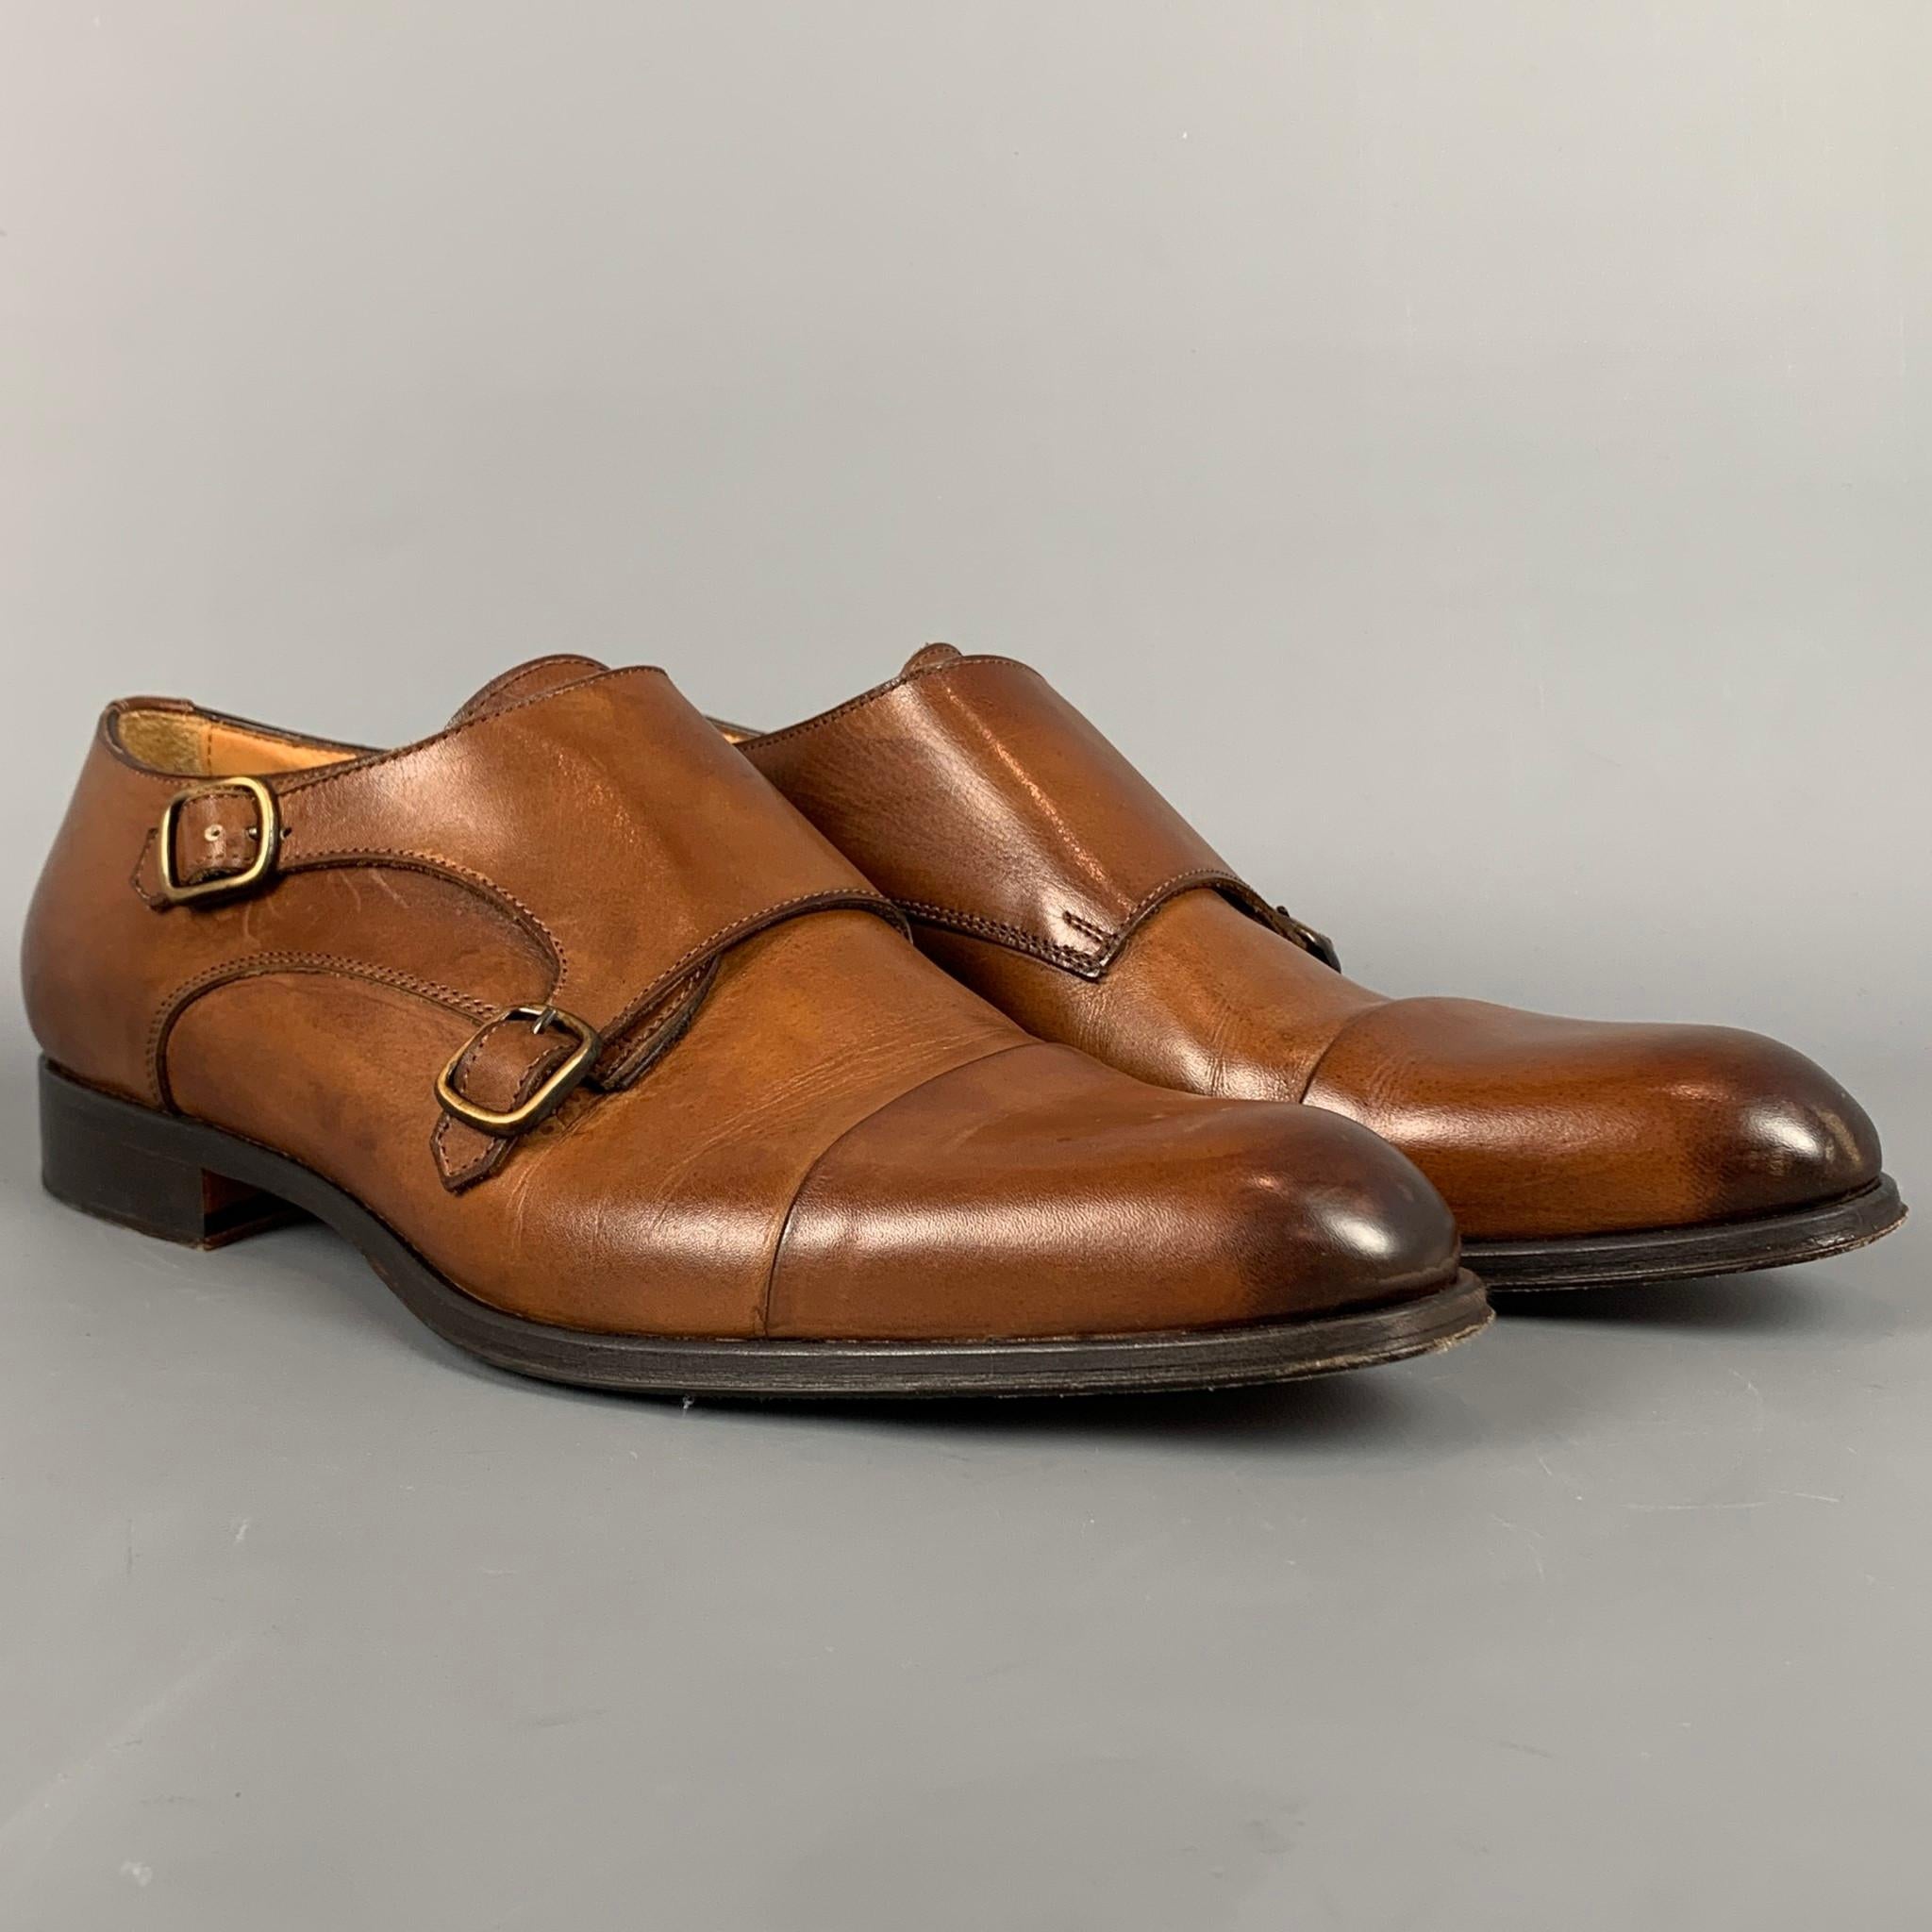 JOSE REAL loafers comes in a cognac antique leather featuring a double monk strap, cap toe, and and wooden sole. Includes box. Made in Italy.

Very Good Pre-Owned Condition.
Marked: T 617 45
Original Retail Price: $495.00

Outsole: 12.5 in. x 4 in.